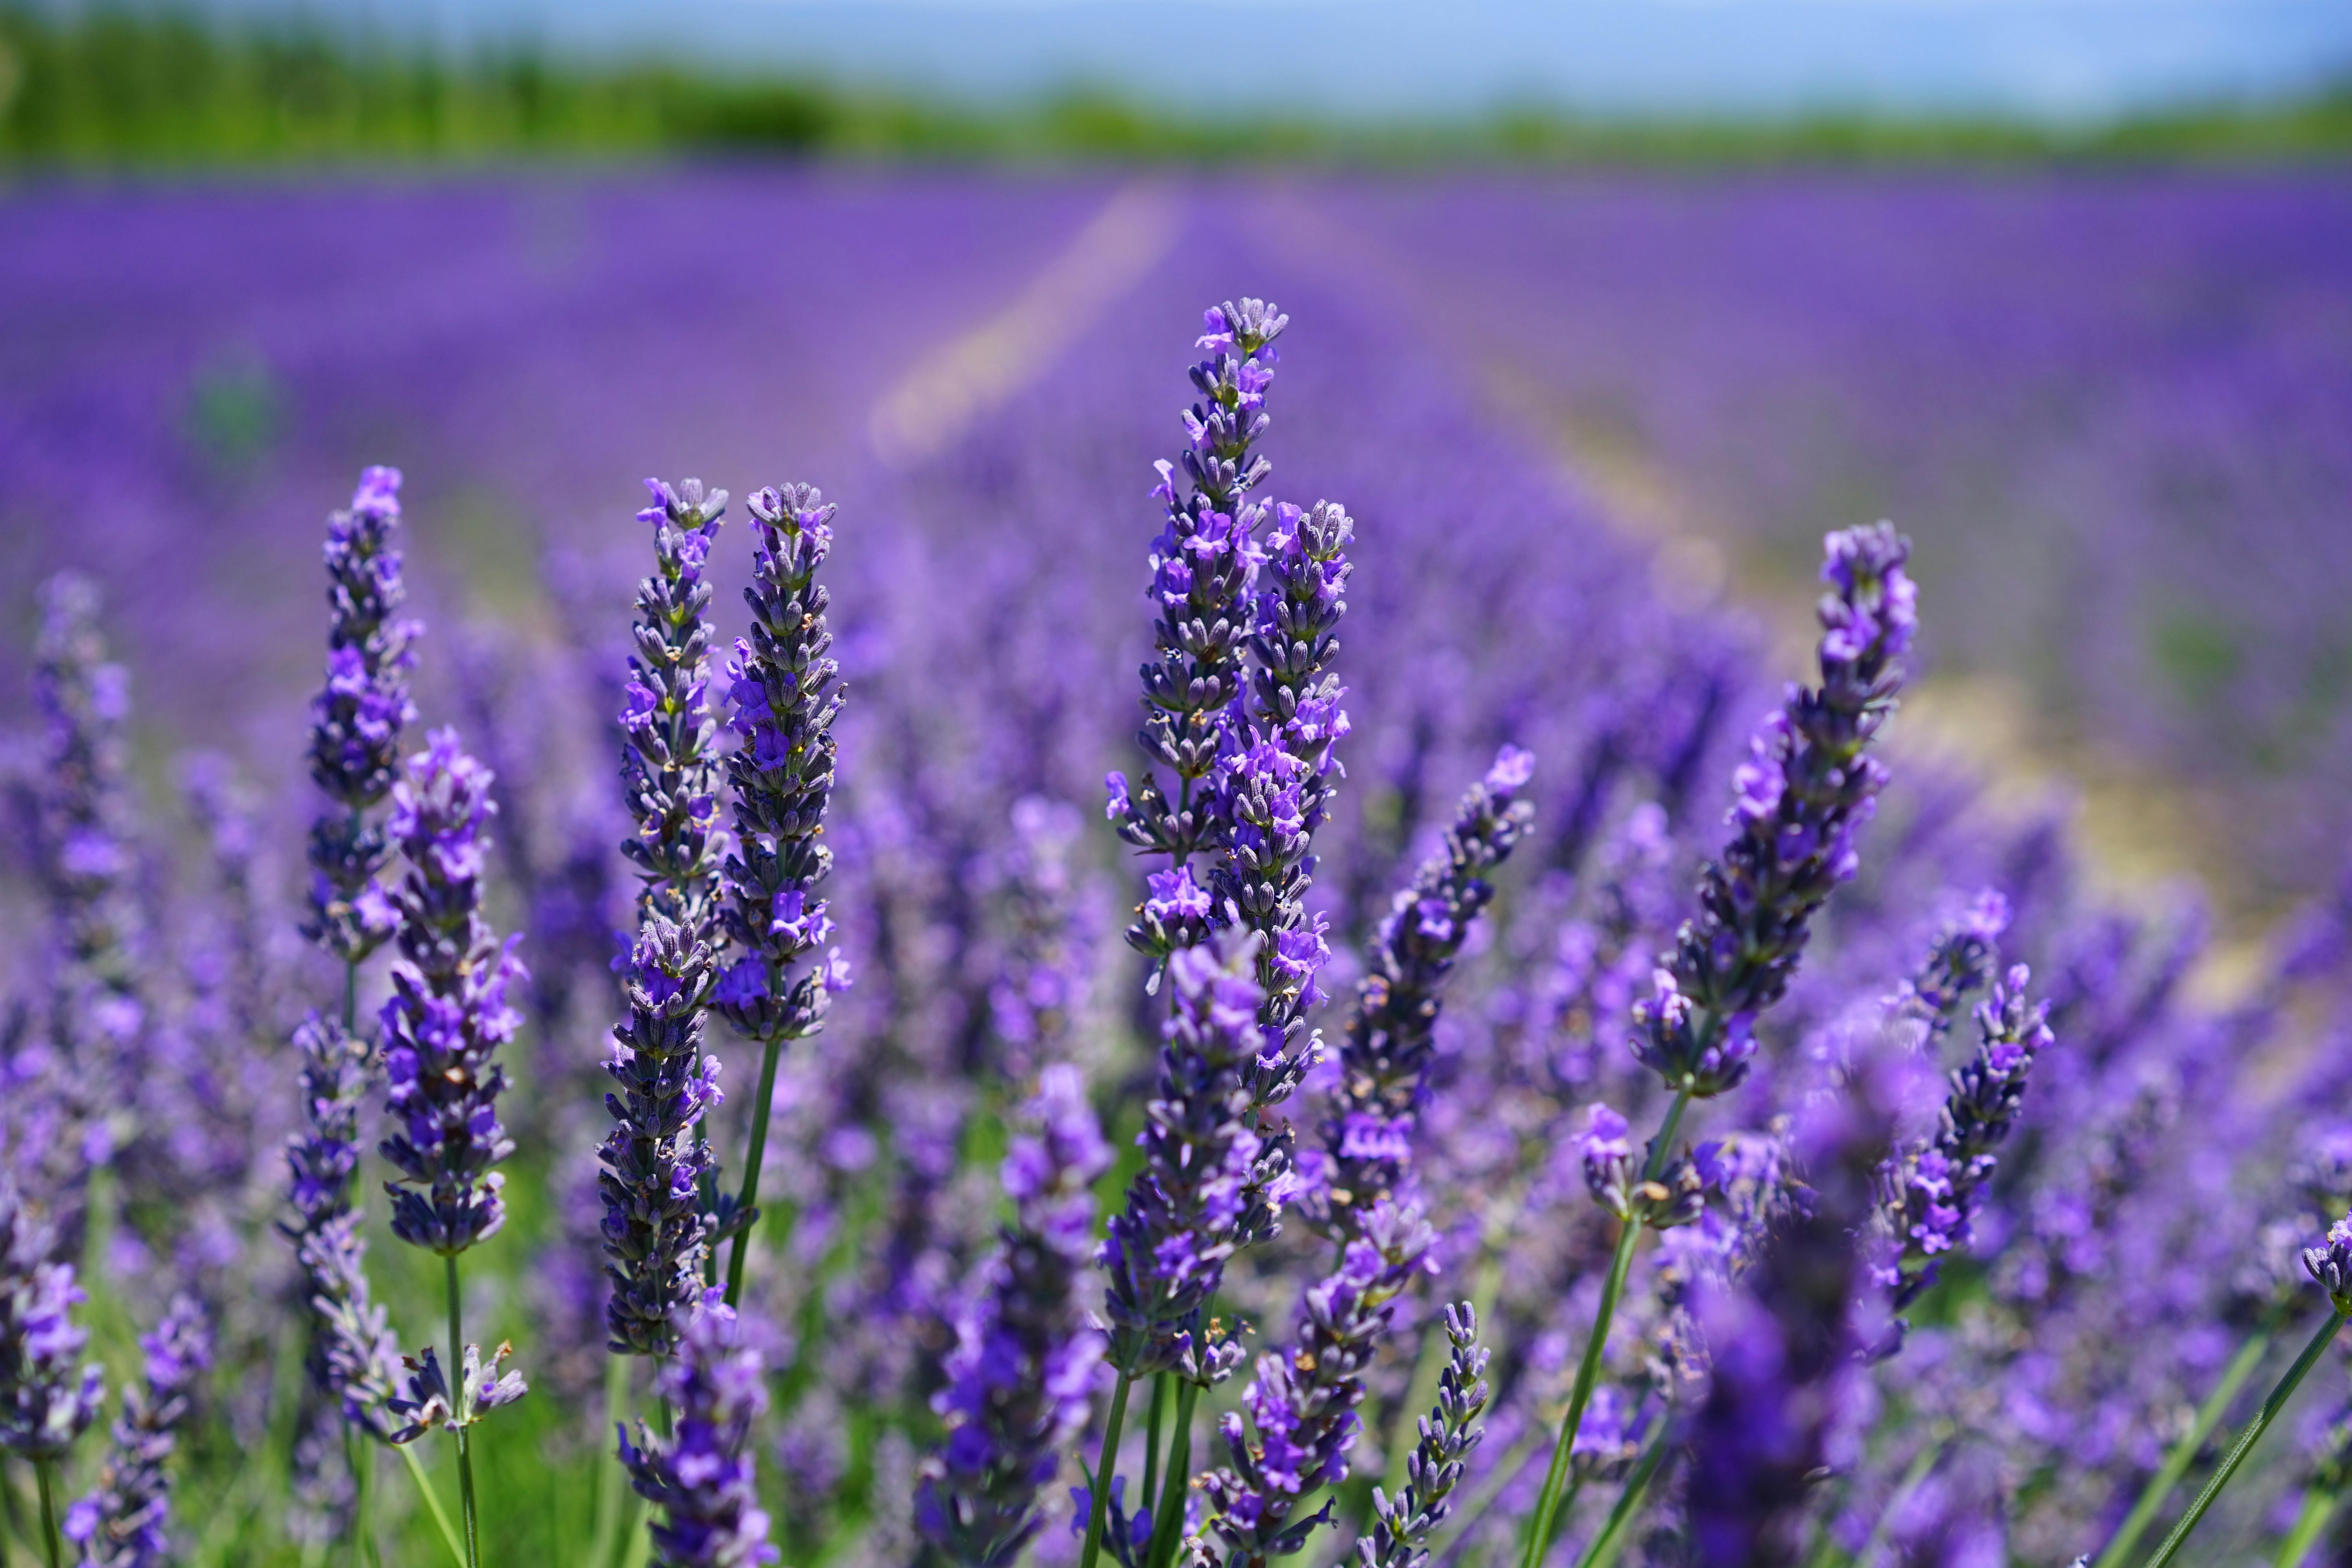 Lavender Field Photos Download The BEST Free Lavender Field Stock Photos   HD Images